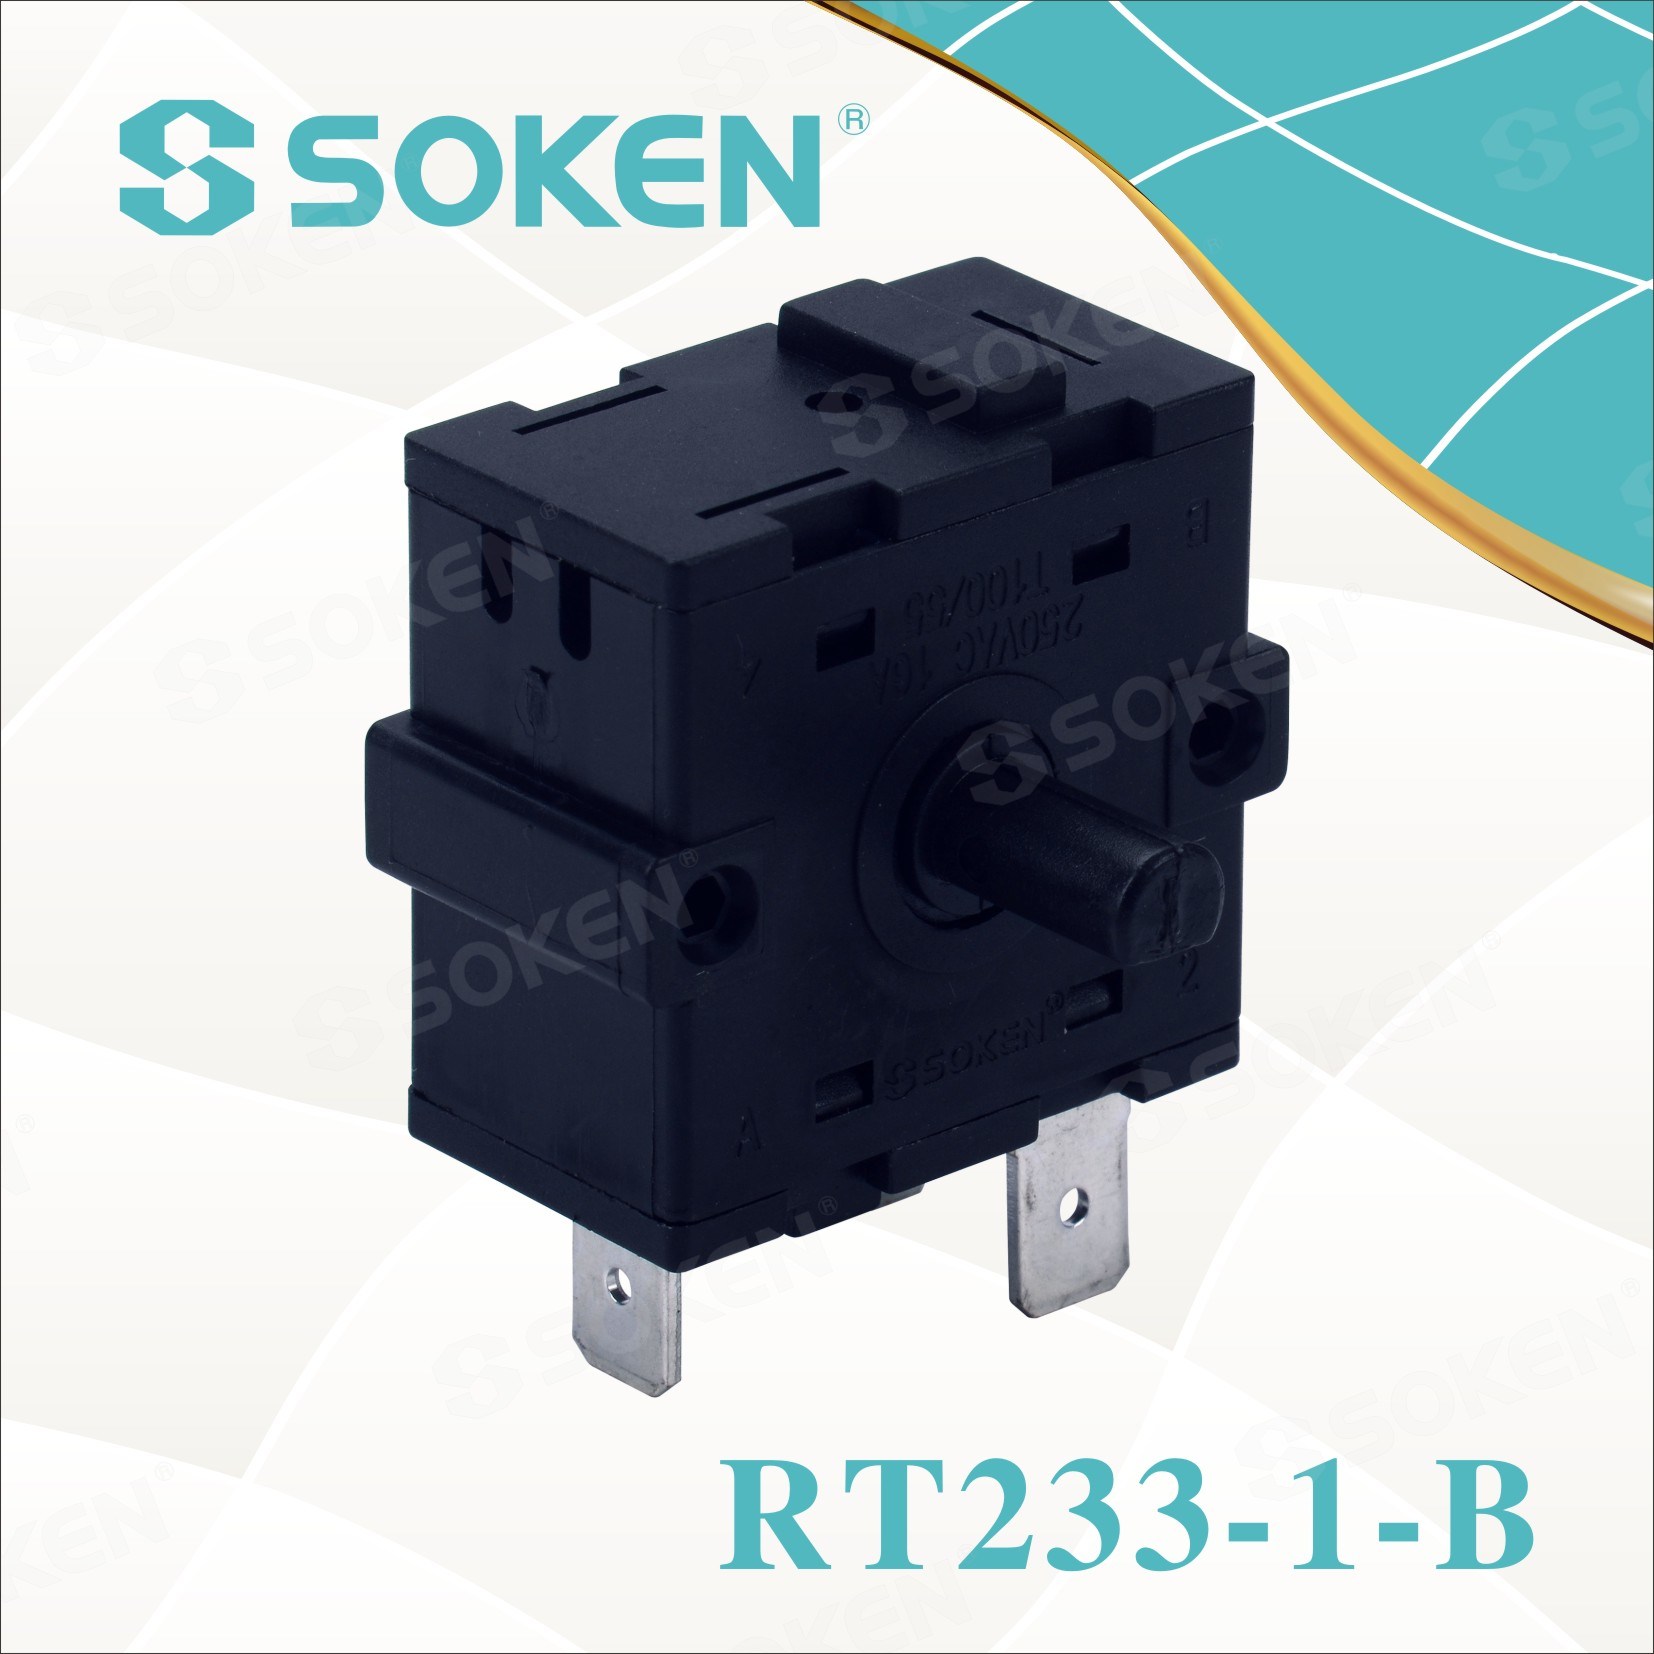 Well-designed On Off Rocker Switch 16a 250v - Soken Rotary Switch for Heater – Master Soken Electrical